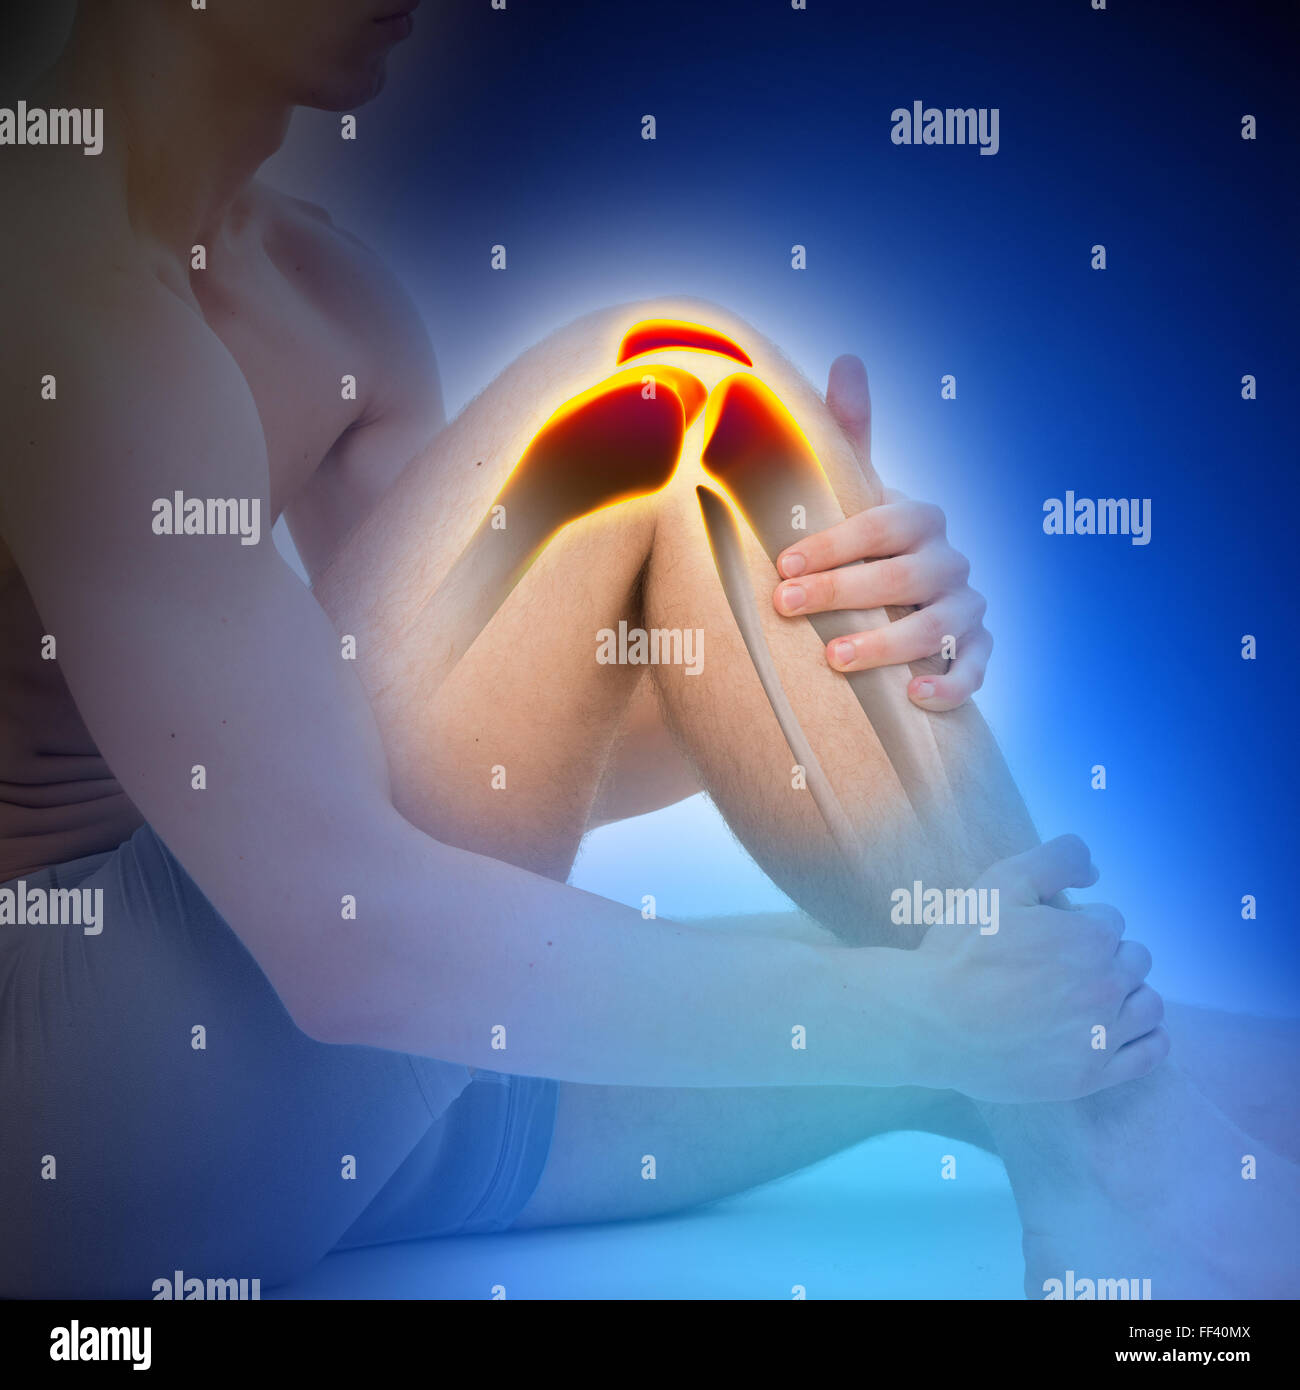 Young Man Knee Pain Anatomy blue concept Stock Photo